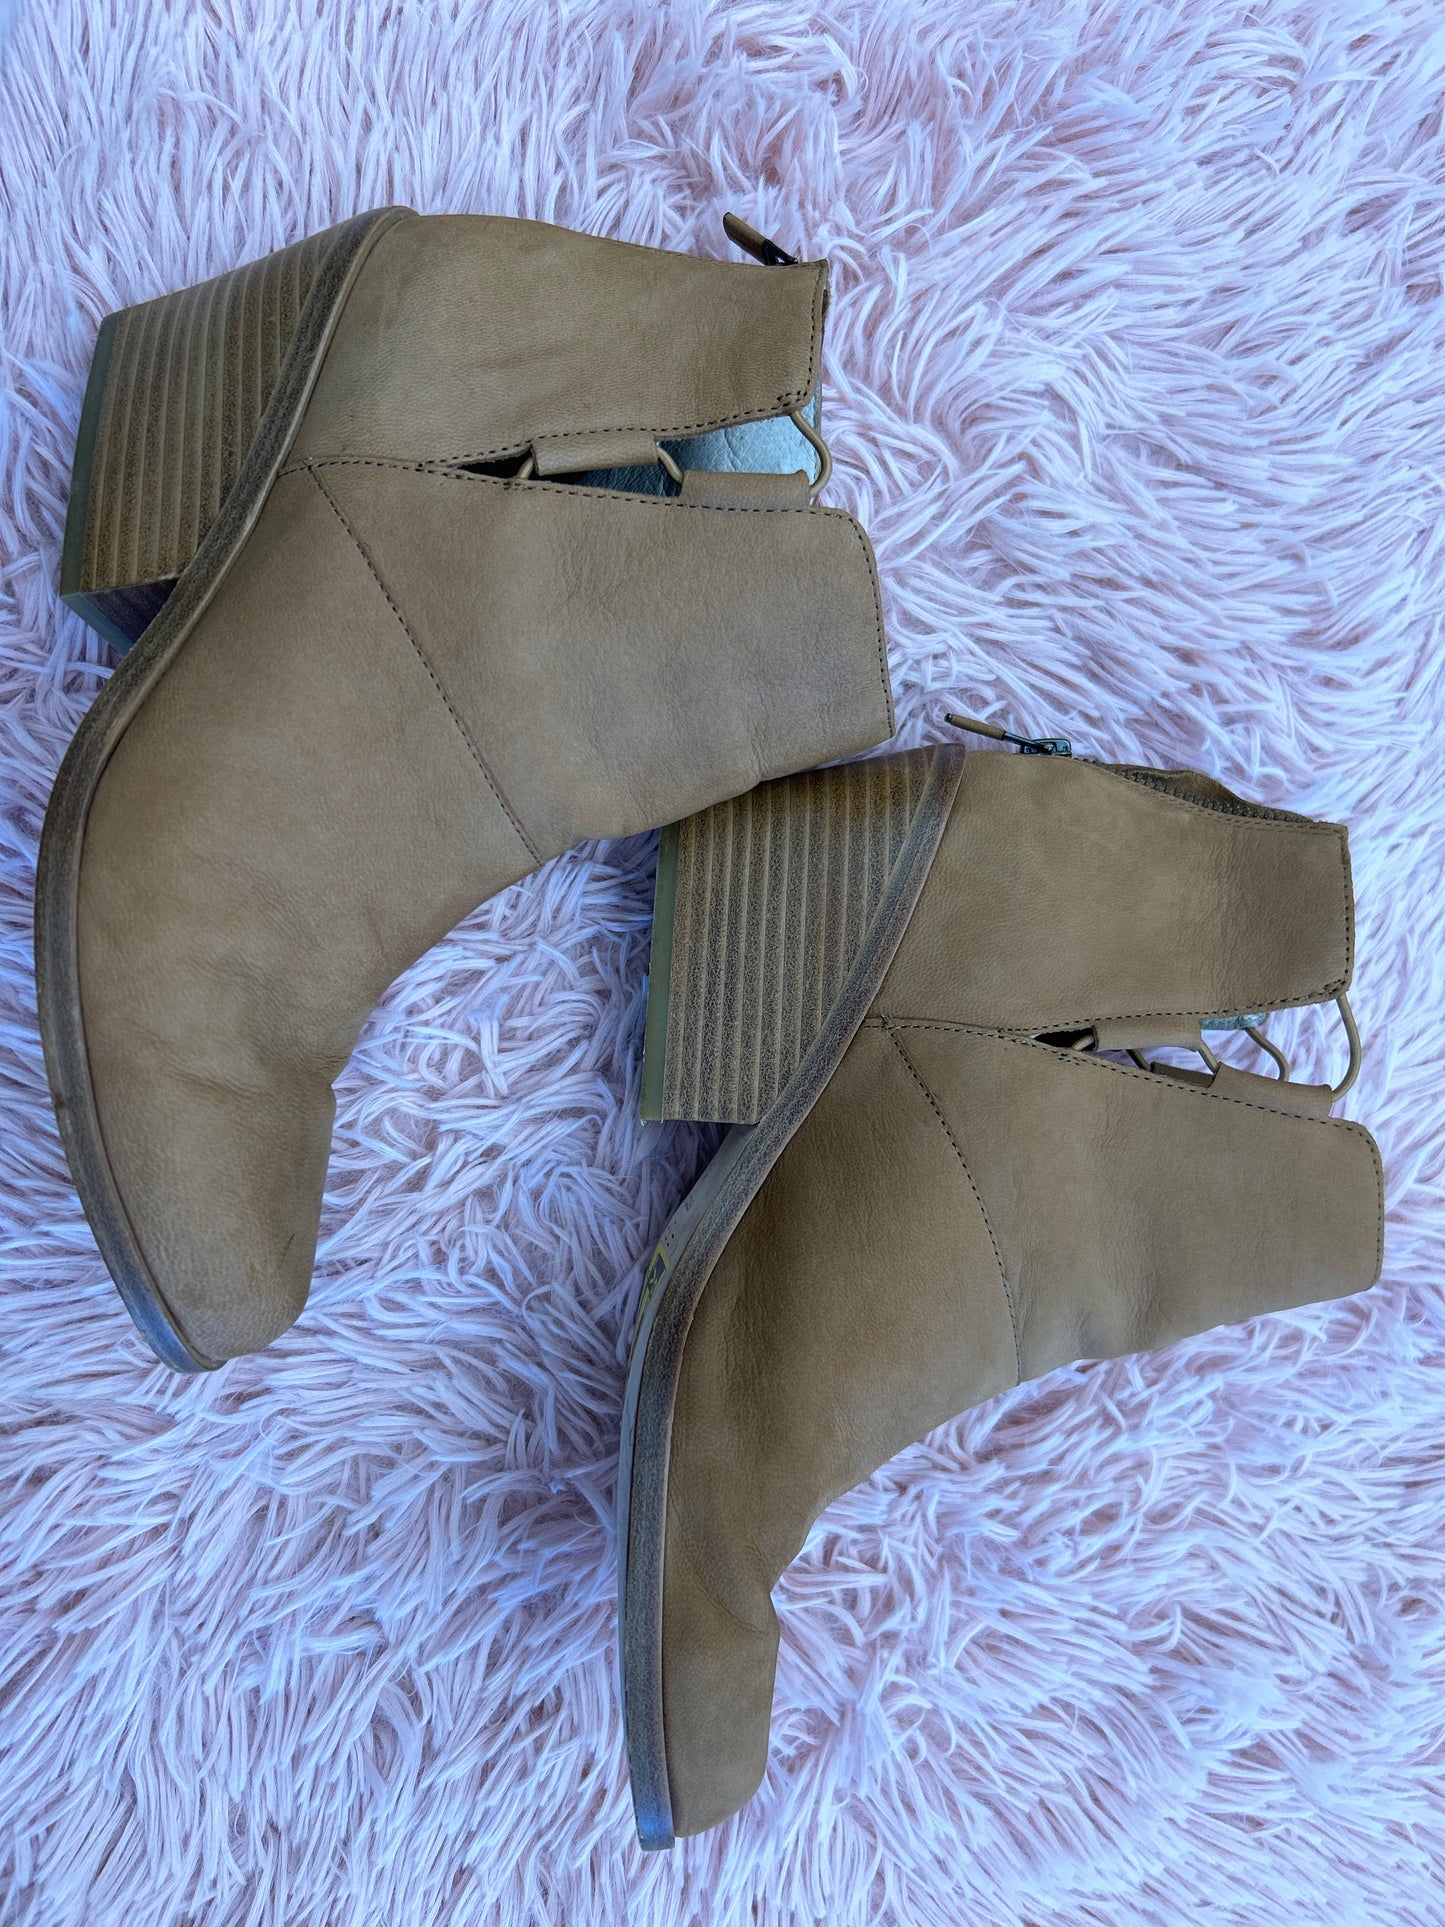 Boots Ankle Heels By Eileen Fisher  Size: 8.5